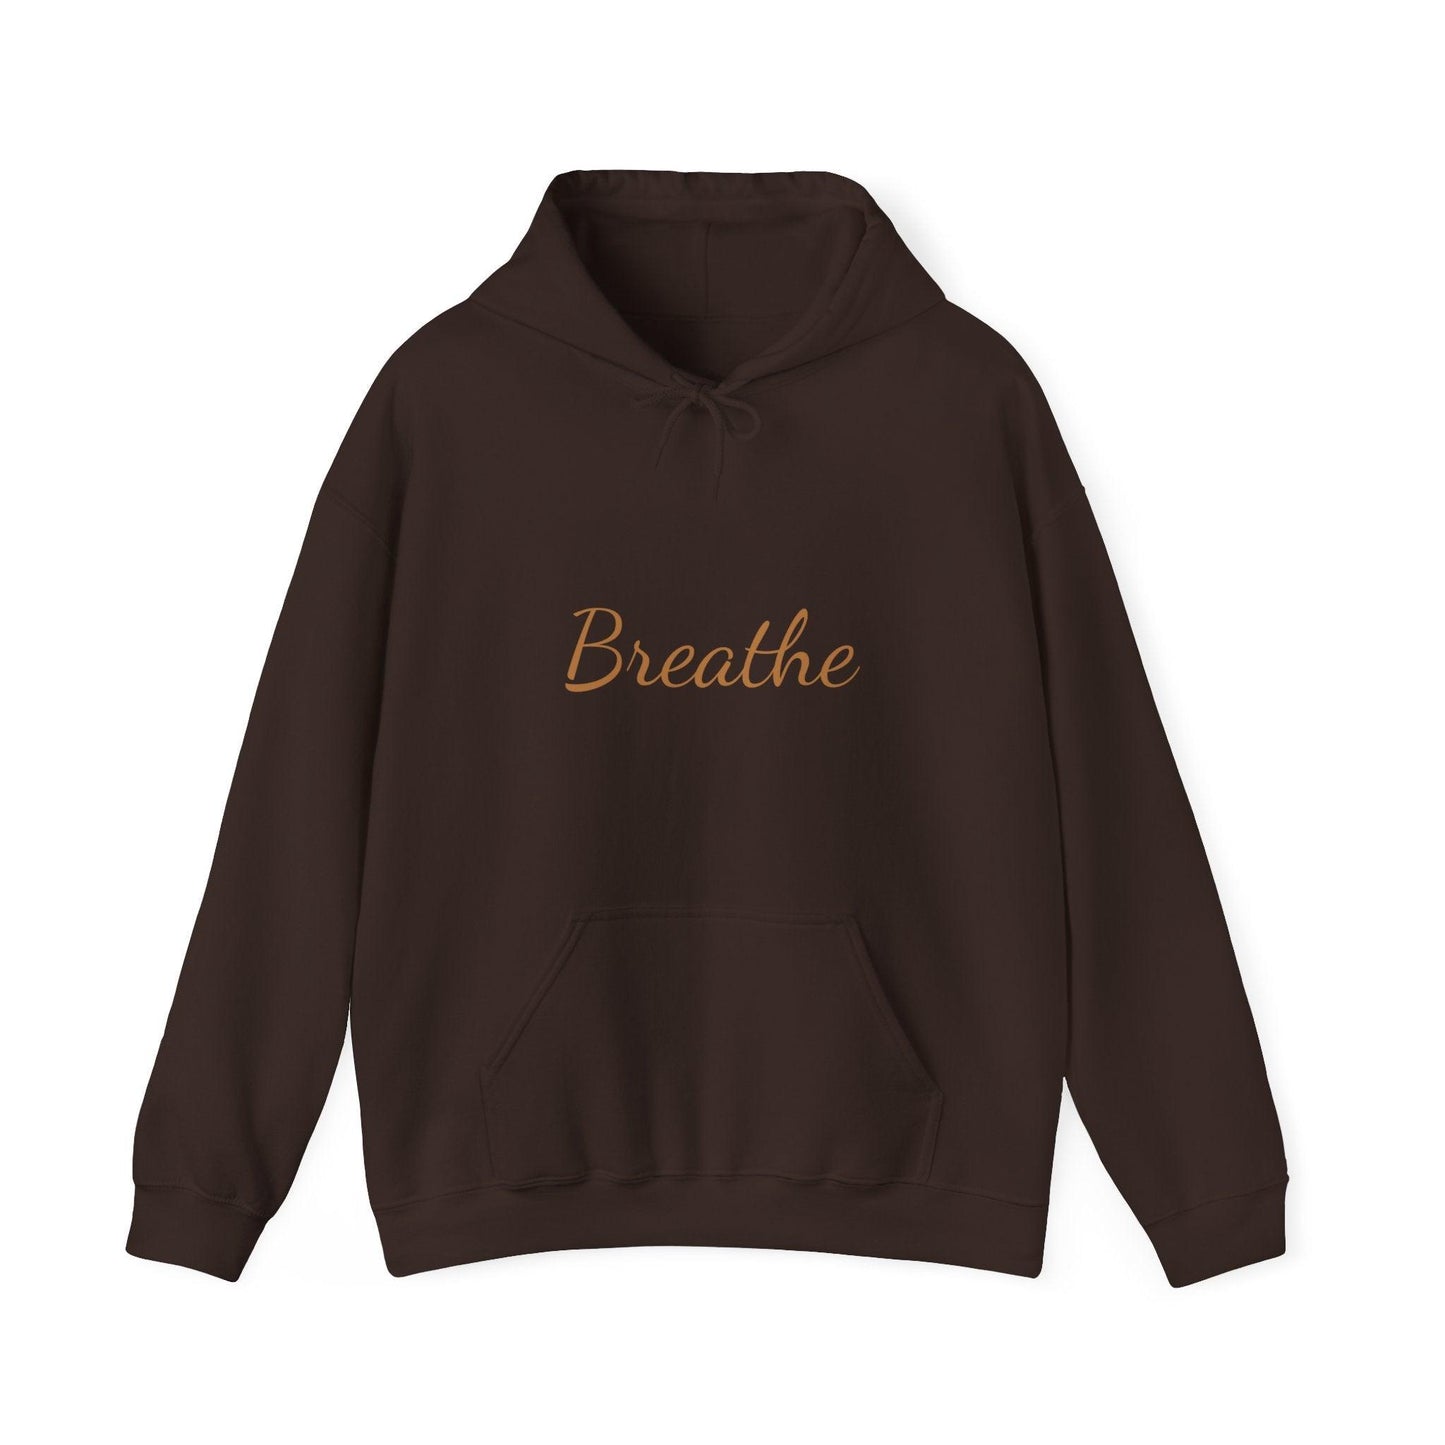 Brown Unisex with Gold Breathe Logo Hoodie - Perfect for Travel, Meditation, Mindfulness and daily wear.